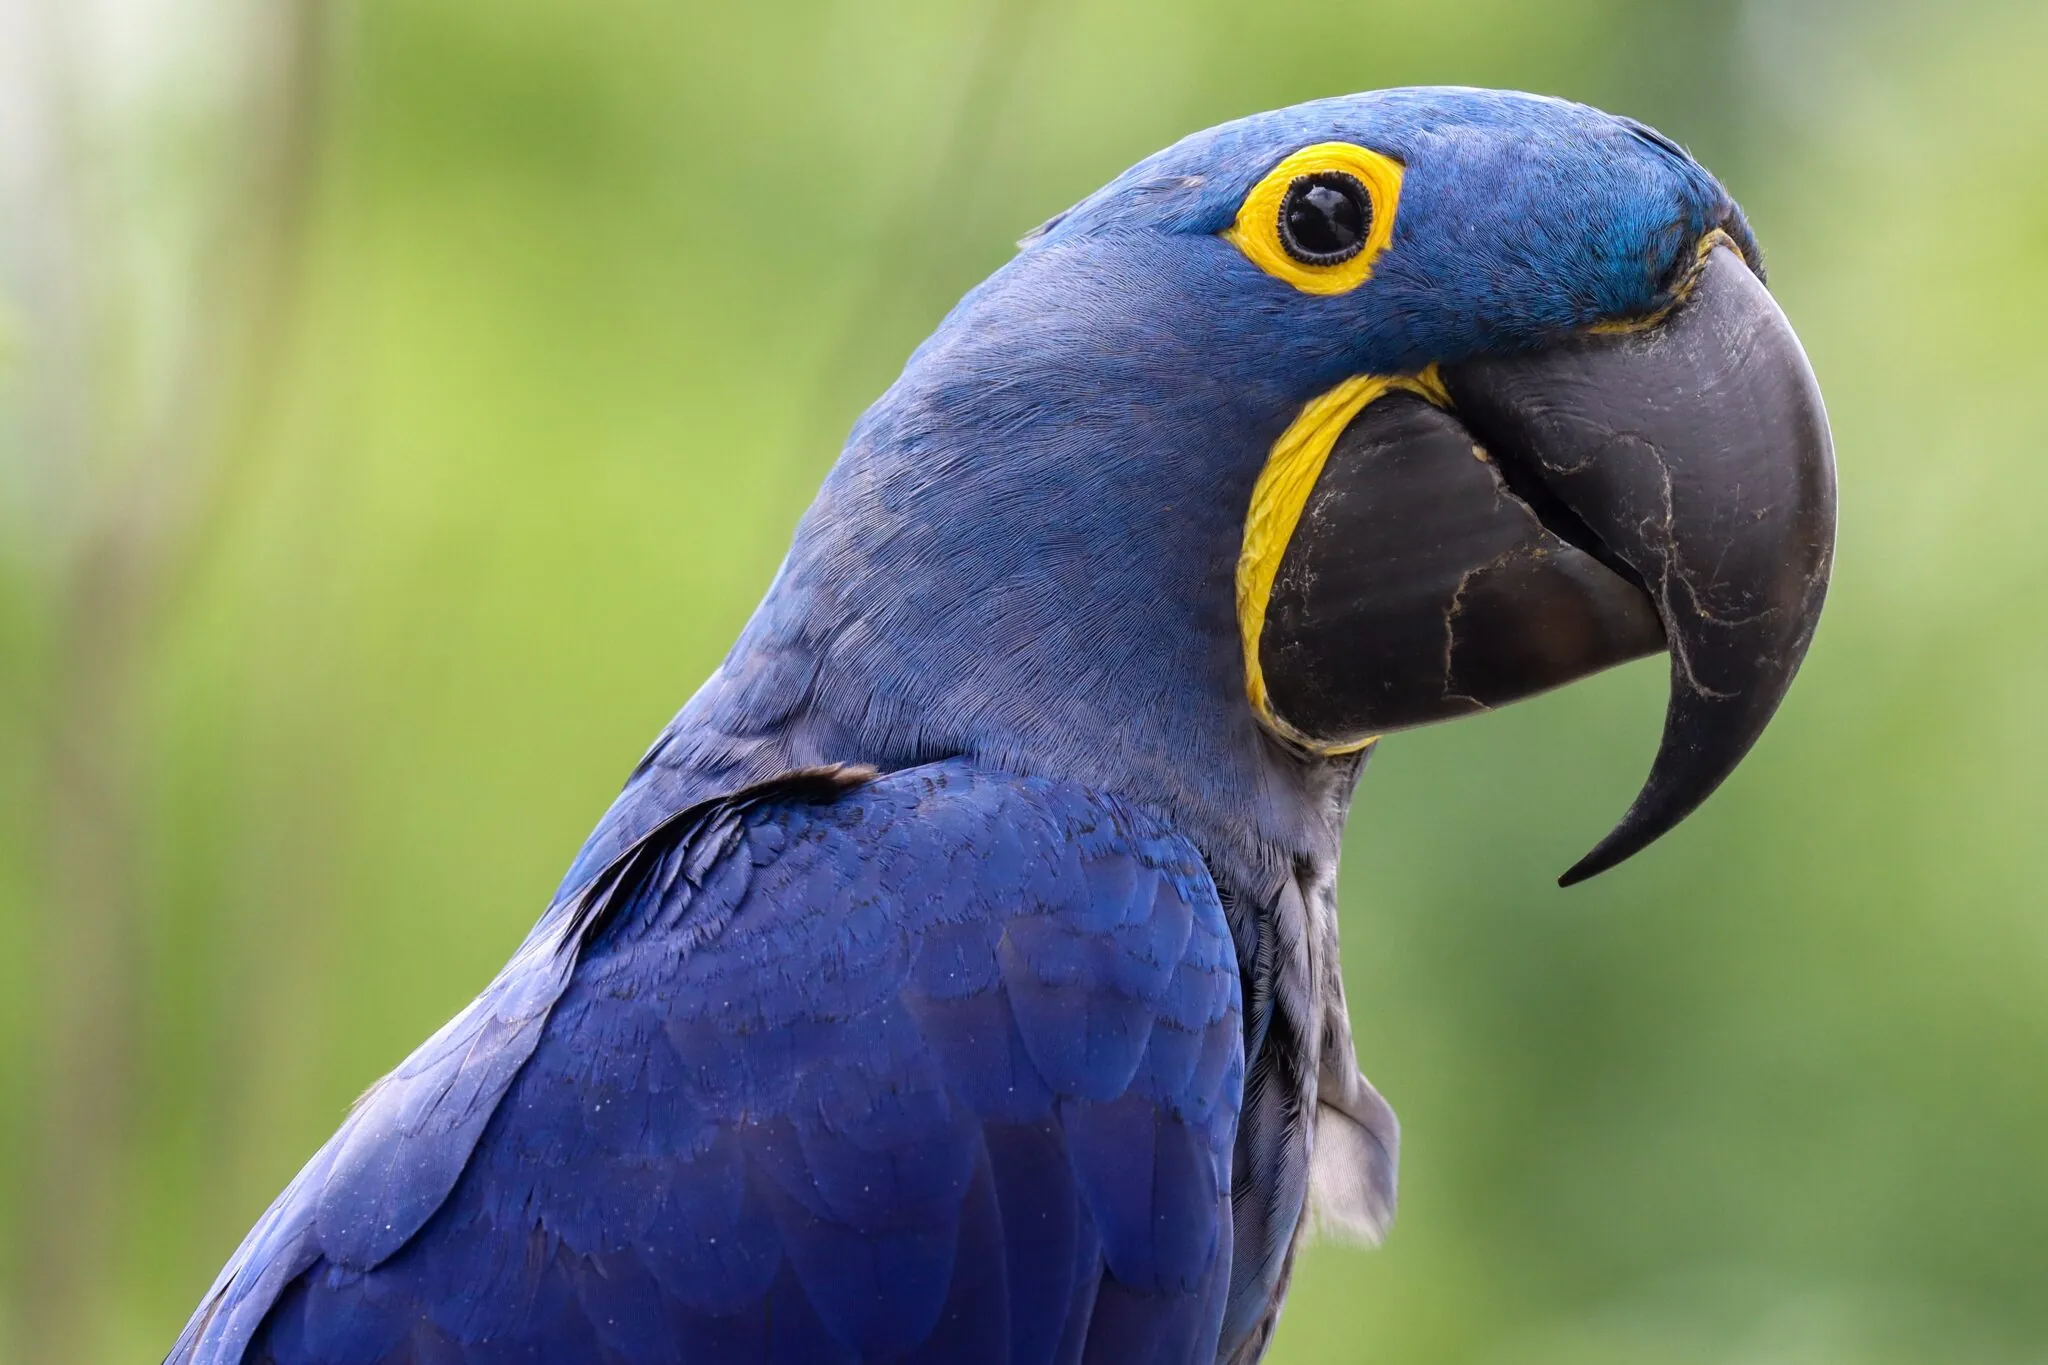 A blue Hyacinth macaw is shown in profile looking to the right. The feathers are royal blue with yellow accents around the eye and beak.